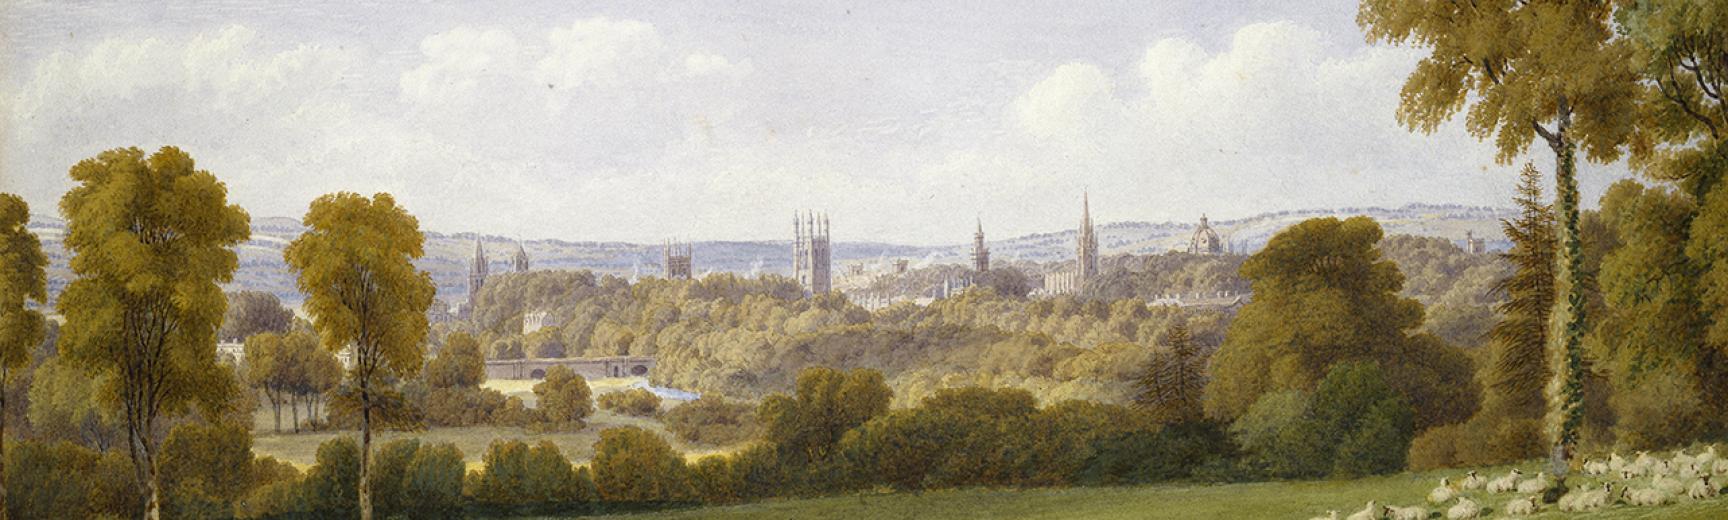 banner William Turner of Oxford, artist View of Oxford from Headington